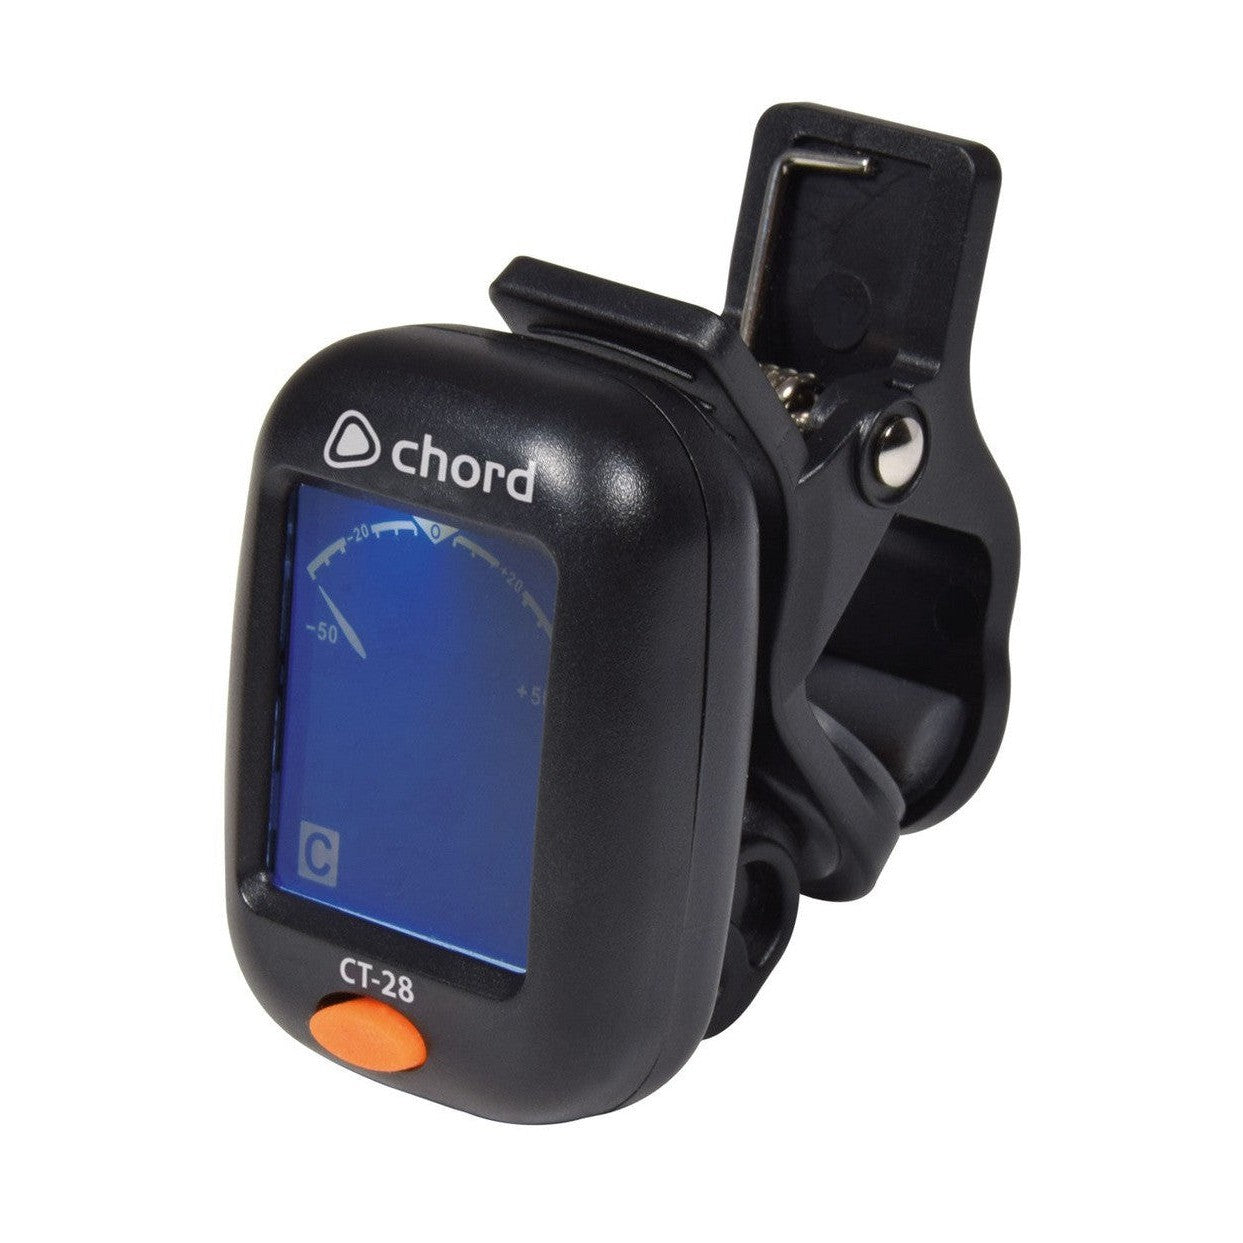 CT-28 Compact Clip Tuner